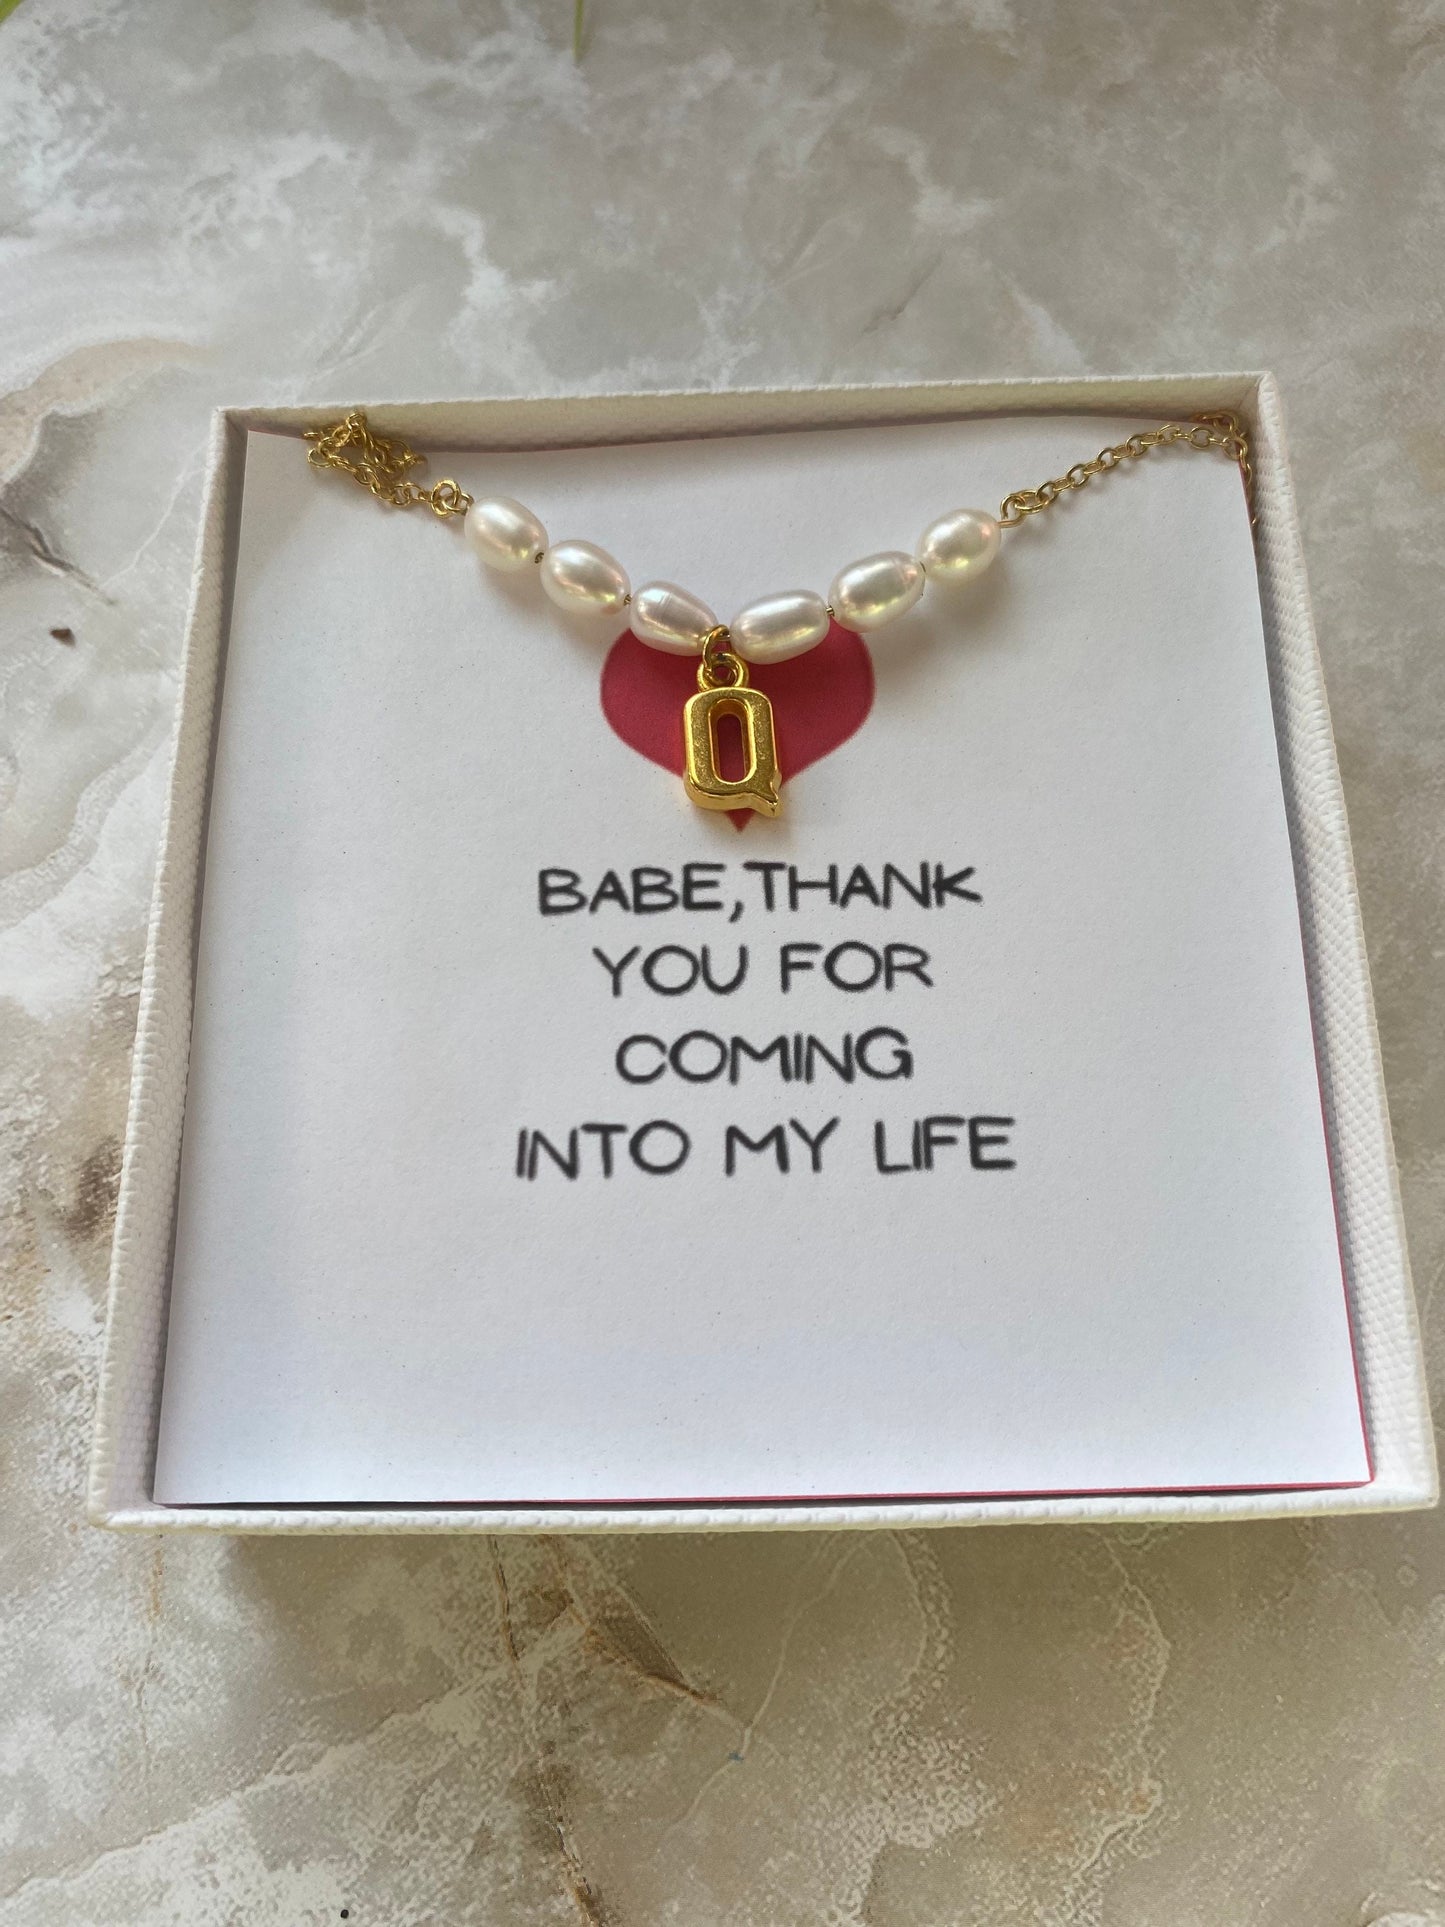 Initial anklet, freshwater pearl anklet, gold plated pearl anklet, Valentine’s Day gift for her , message card jewelry for soulmate,